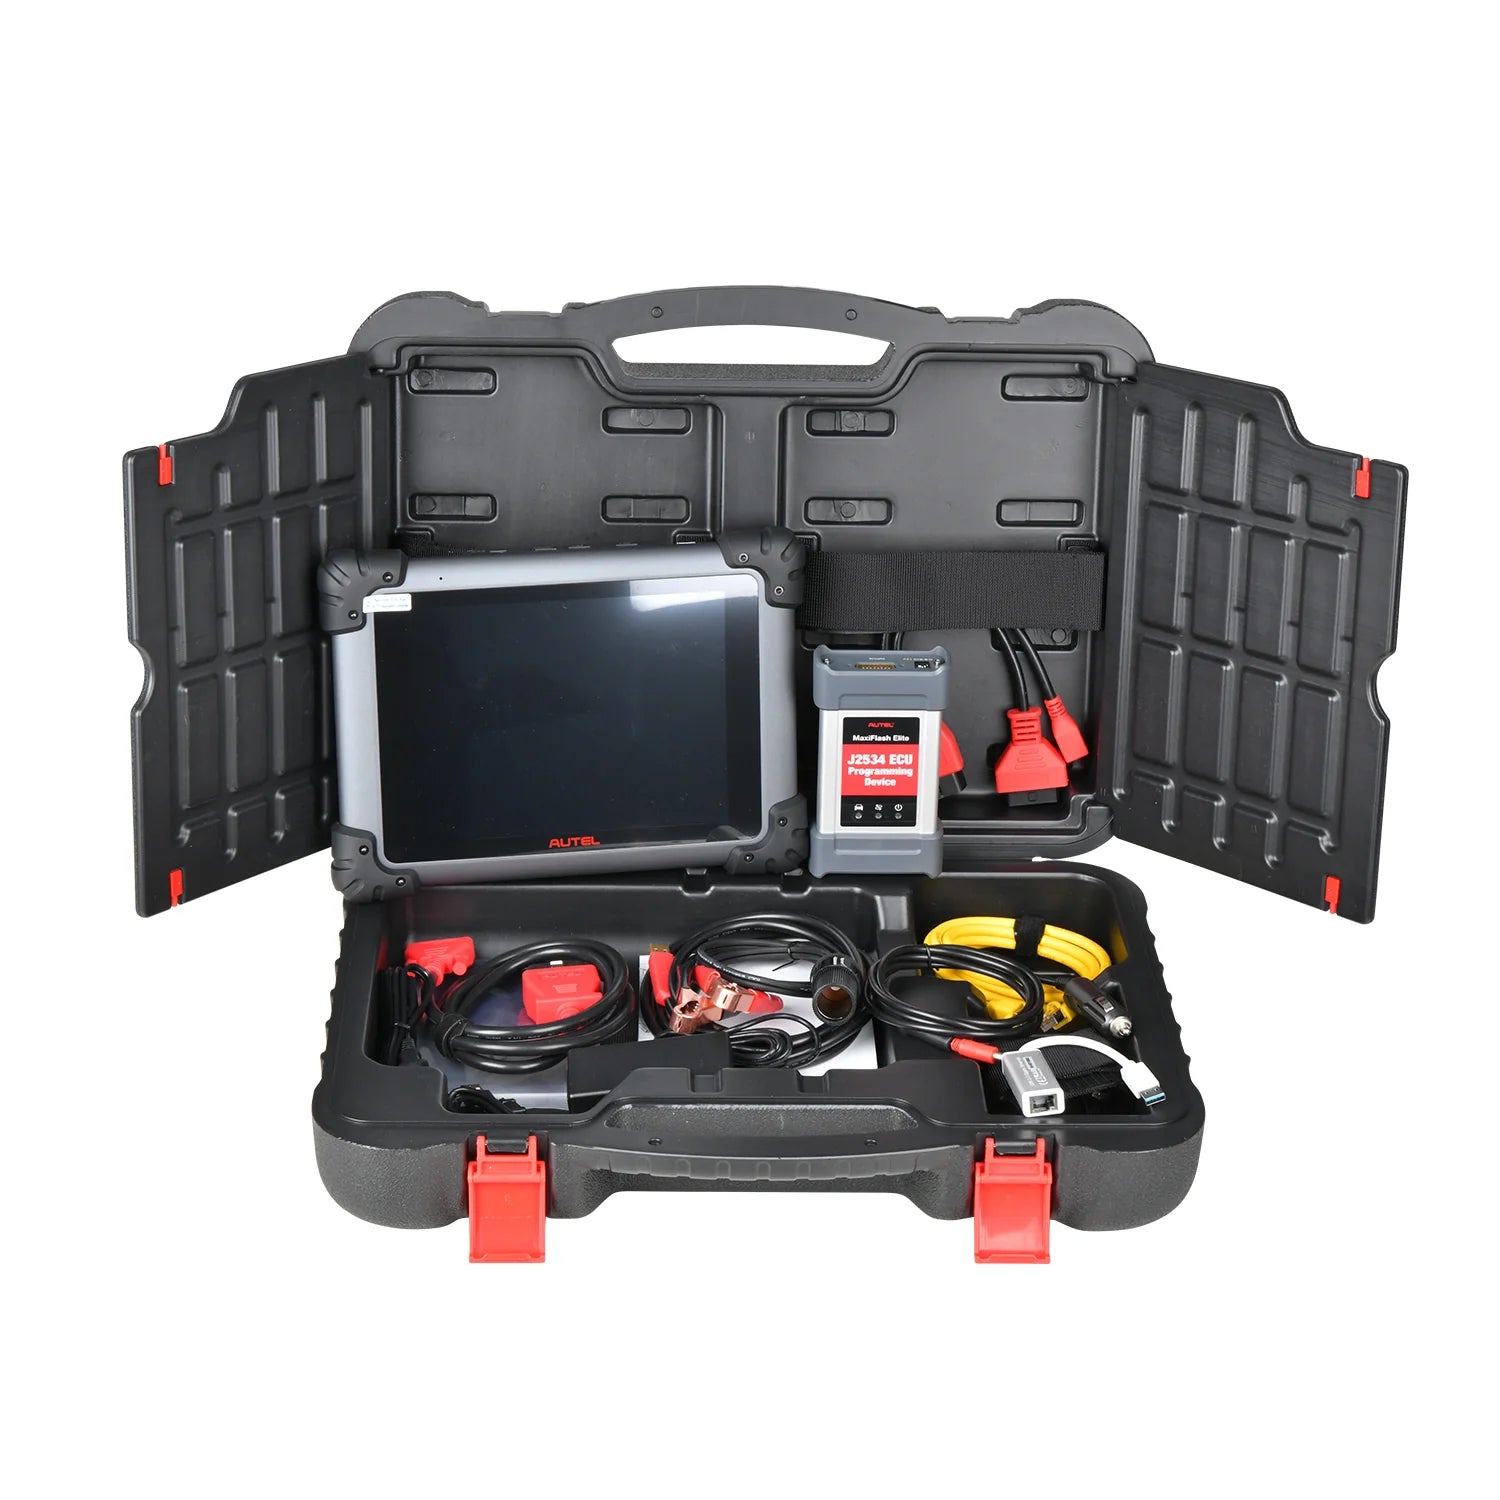 Autel Maxisys MS908S PRO II package Carrying case